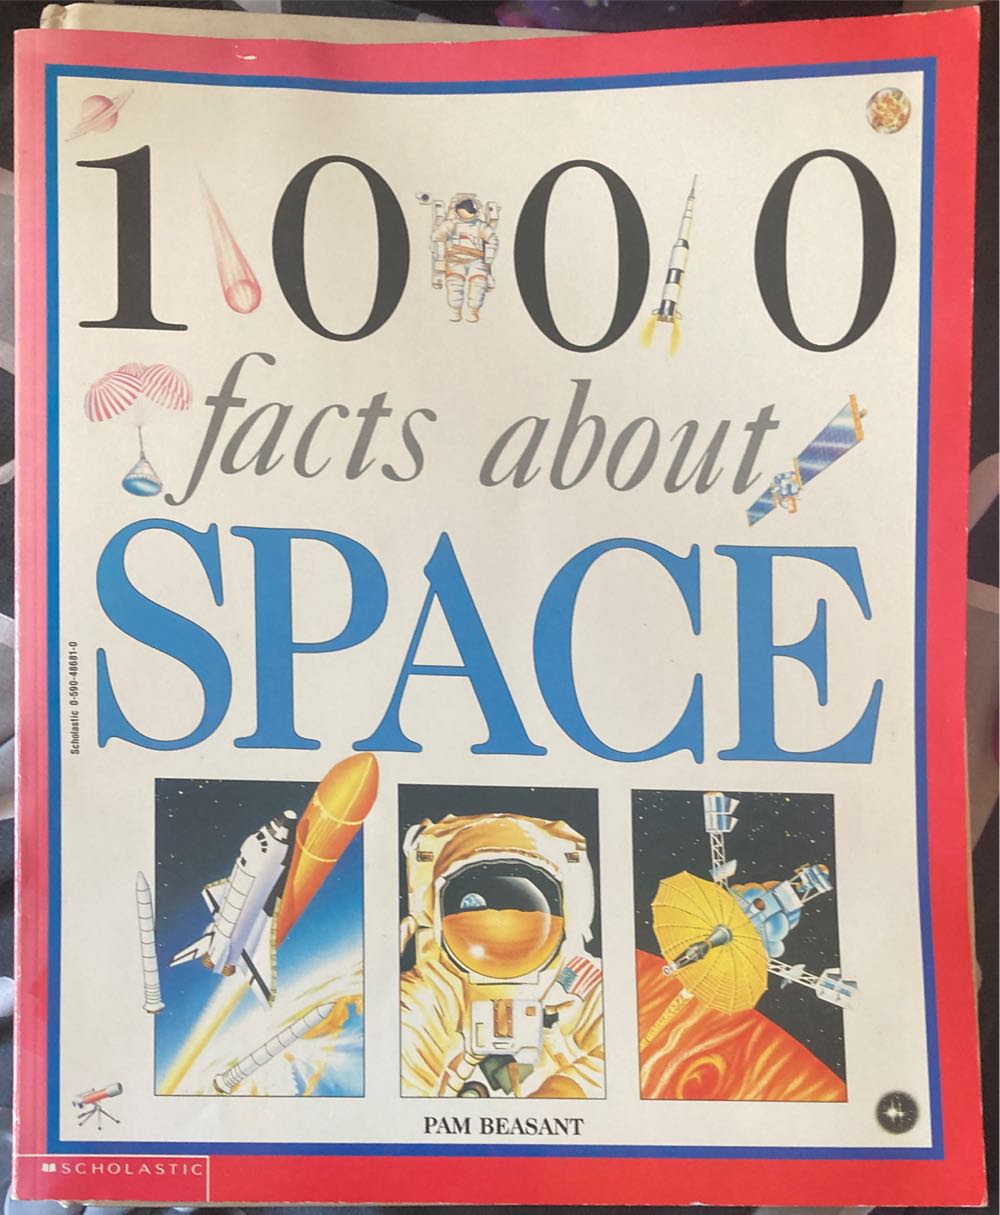 1000 Facts About Space - Pam Beasant (Scholastic Incorporated - Paperback) book collectible [Barcode 9780590486811] - Main Image 2